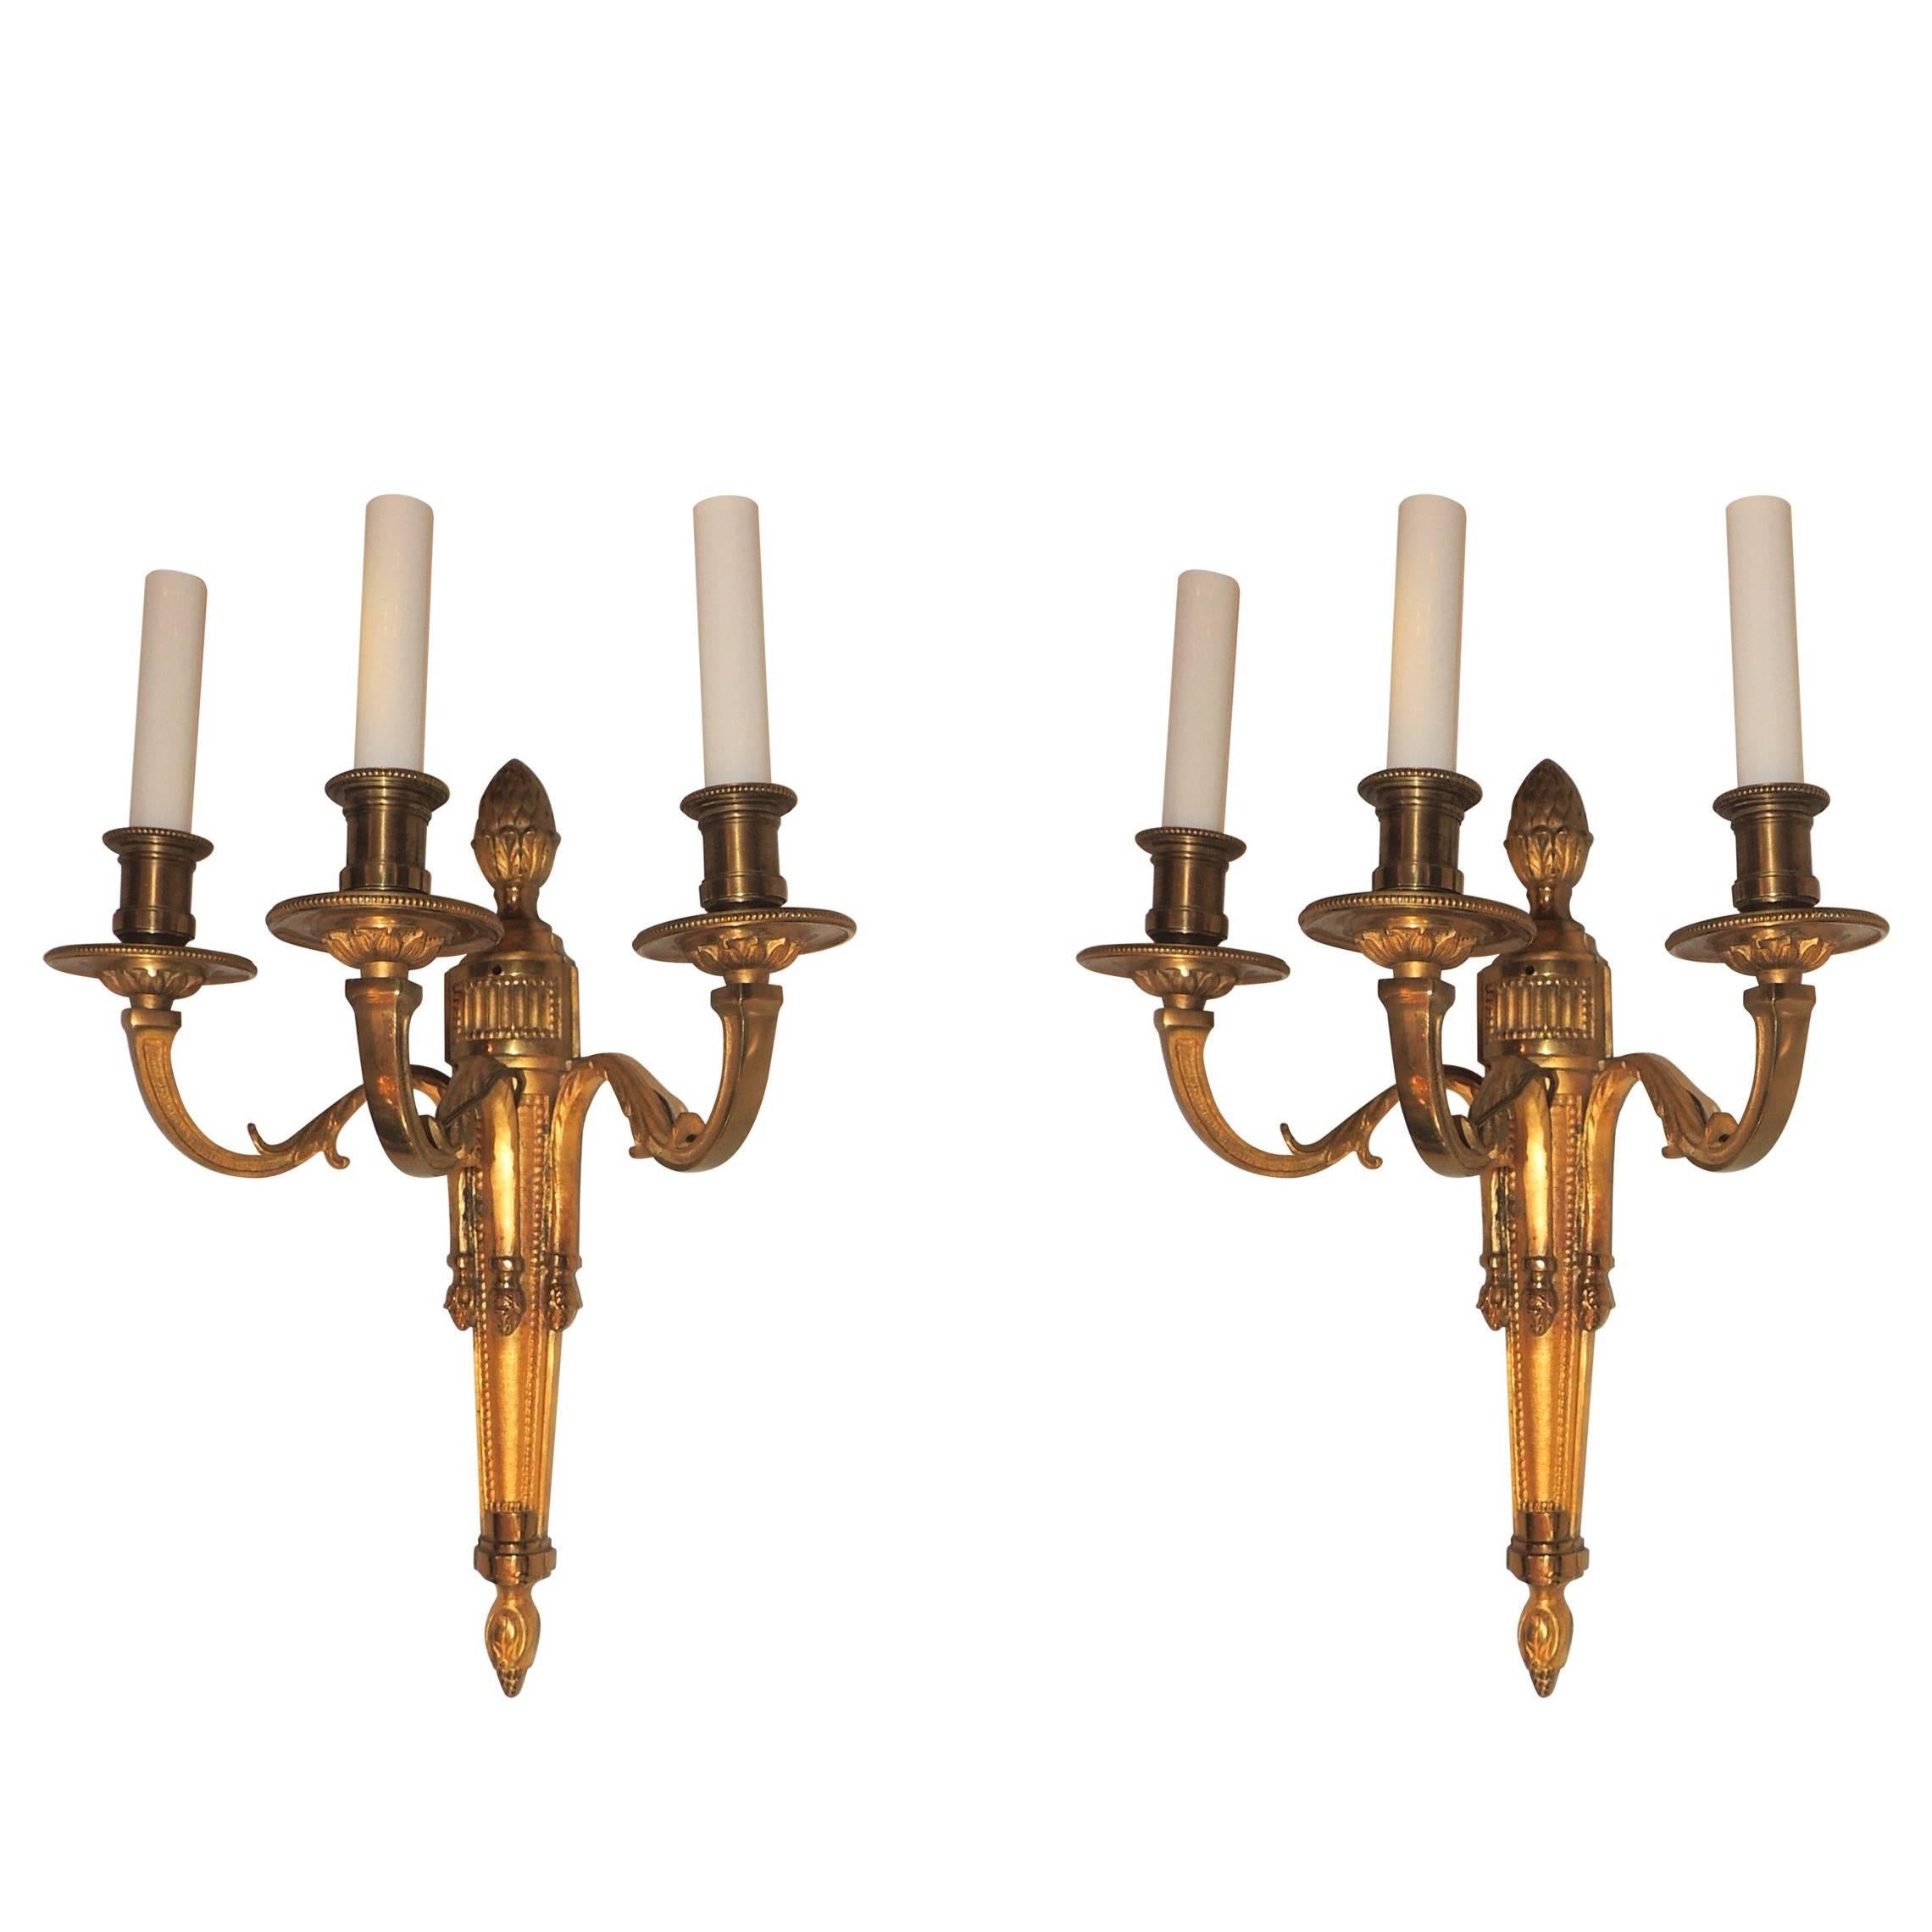 Wonderful Pair Neoclassical Urn Three-Arm Regency Caldwell Empire Sconces For Sale